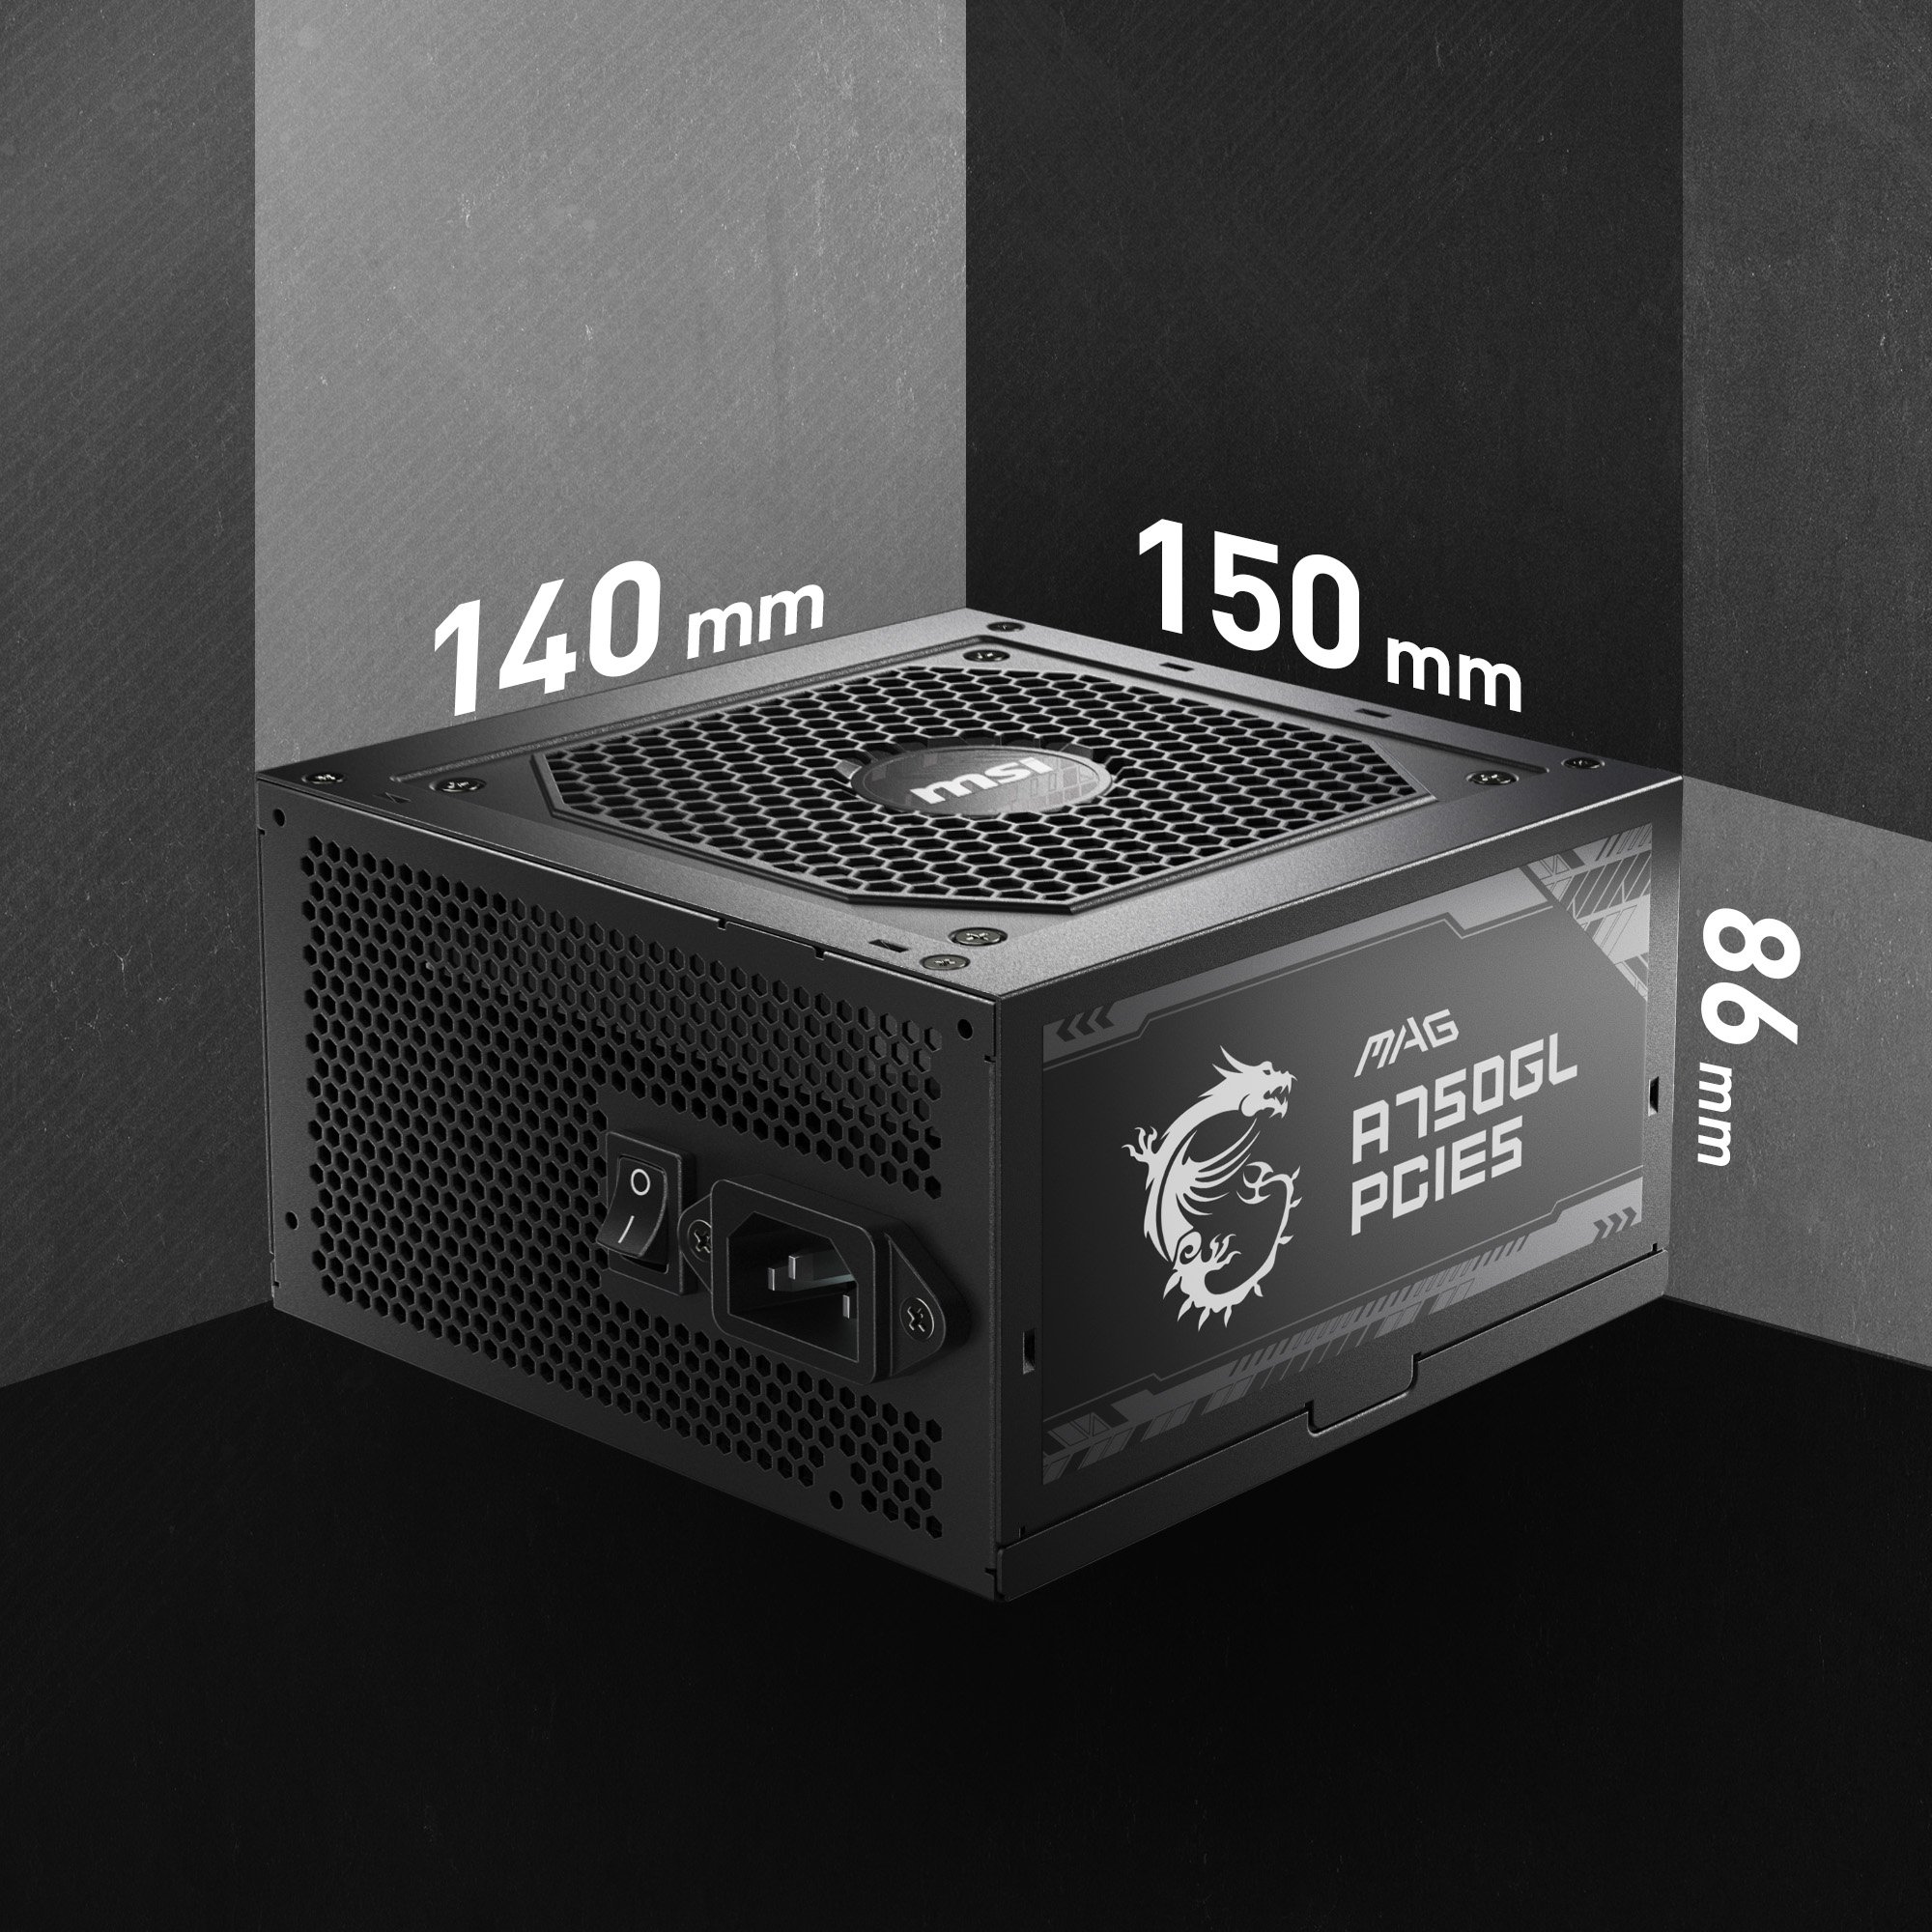 MSI MAG A750GL PCIE5 power supply